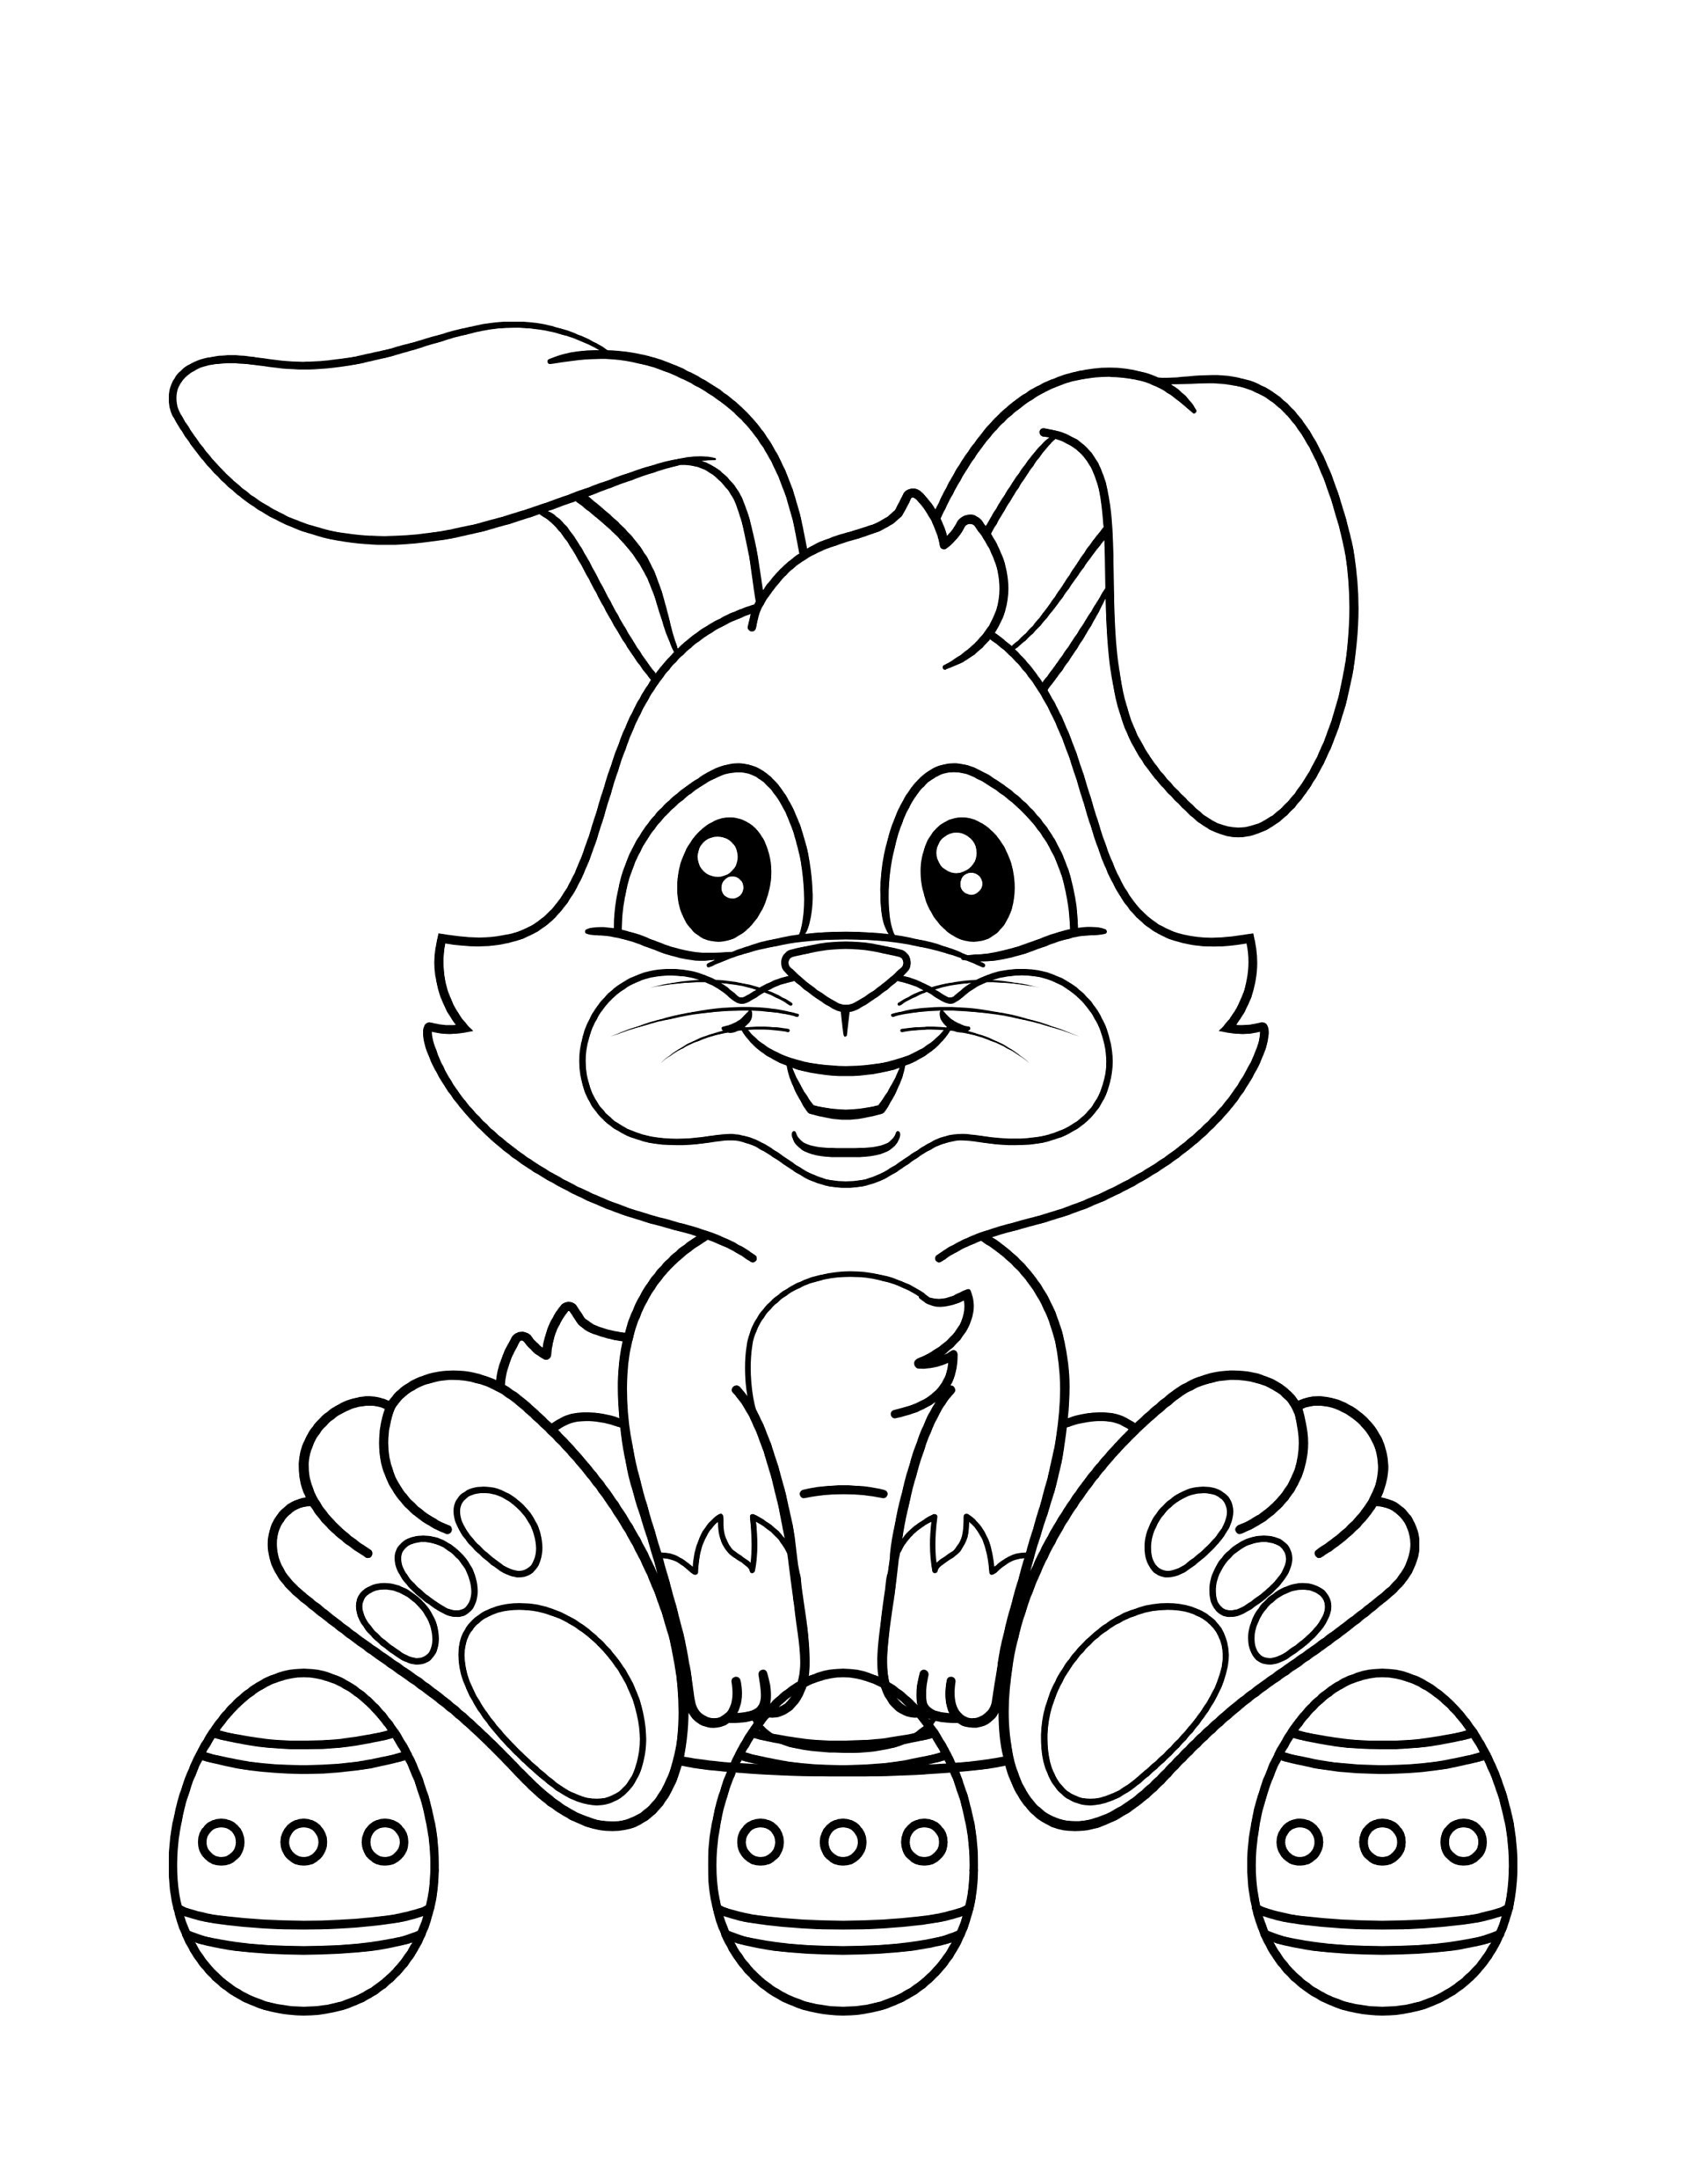 Easter coloring sheets easter bunny coloring page x a easter coloring page coloring pages printable coloring instant download instant download